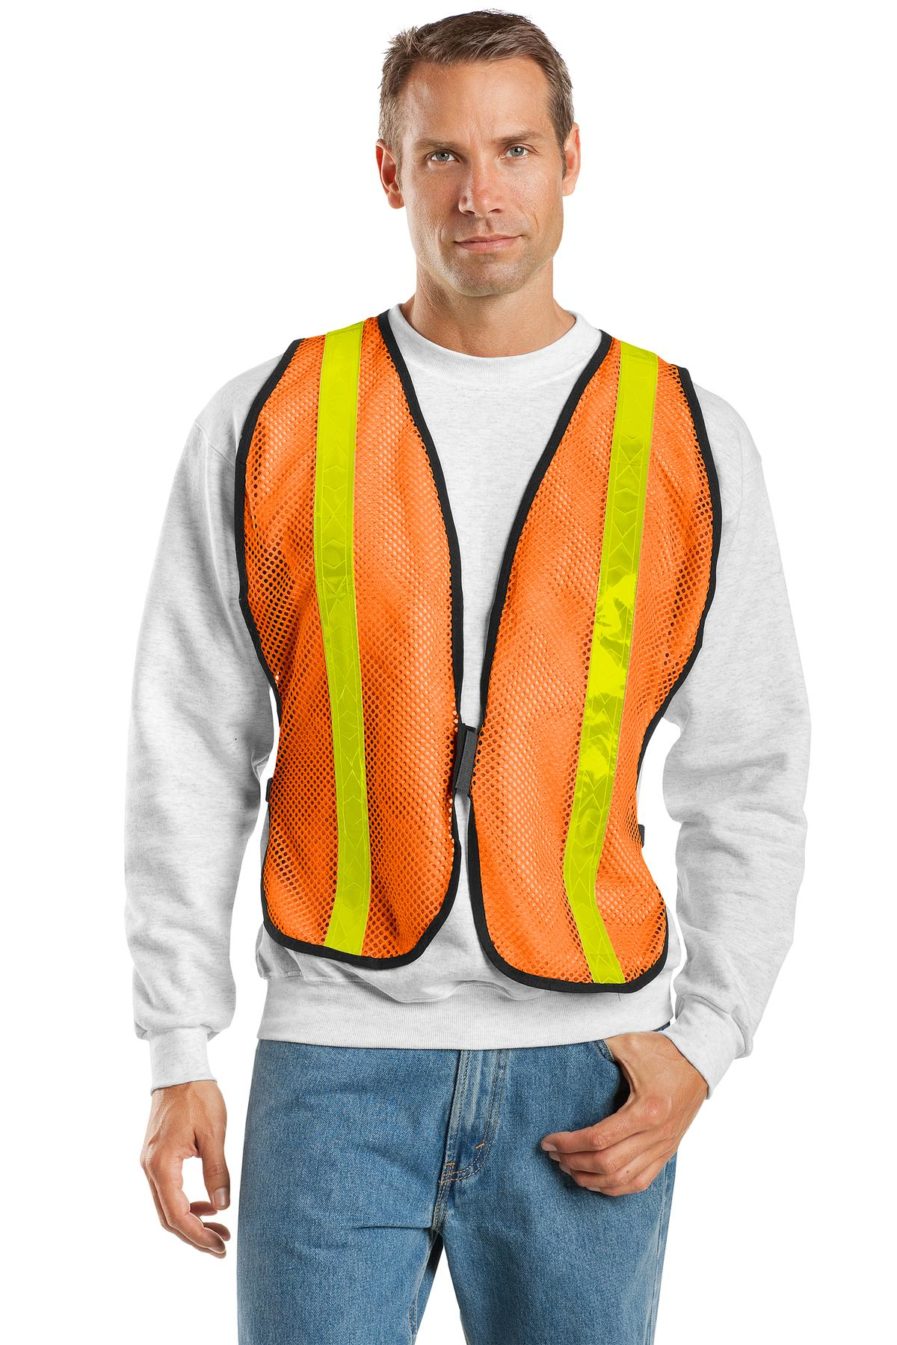 safety orange Mesh with Safety yellow reflective tape